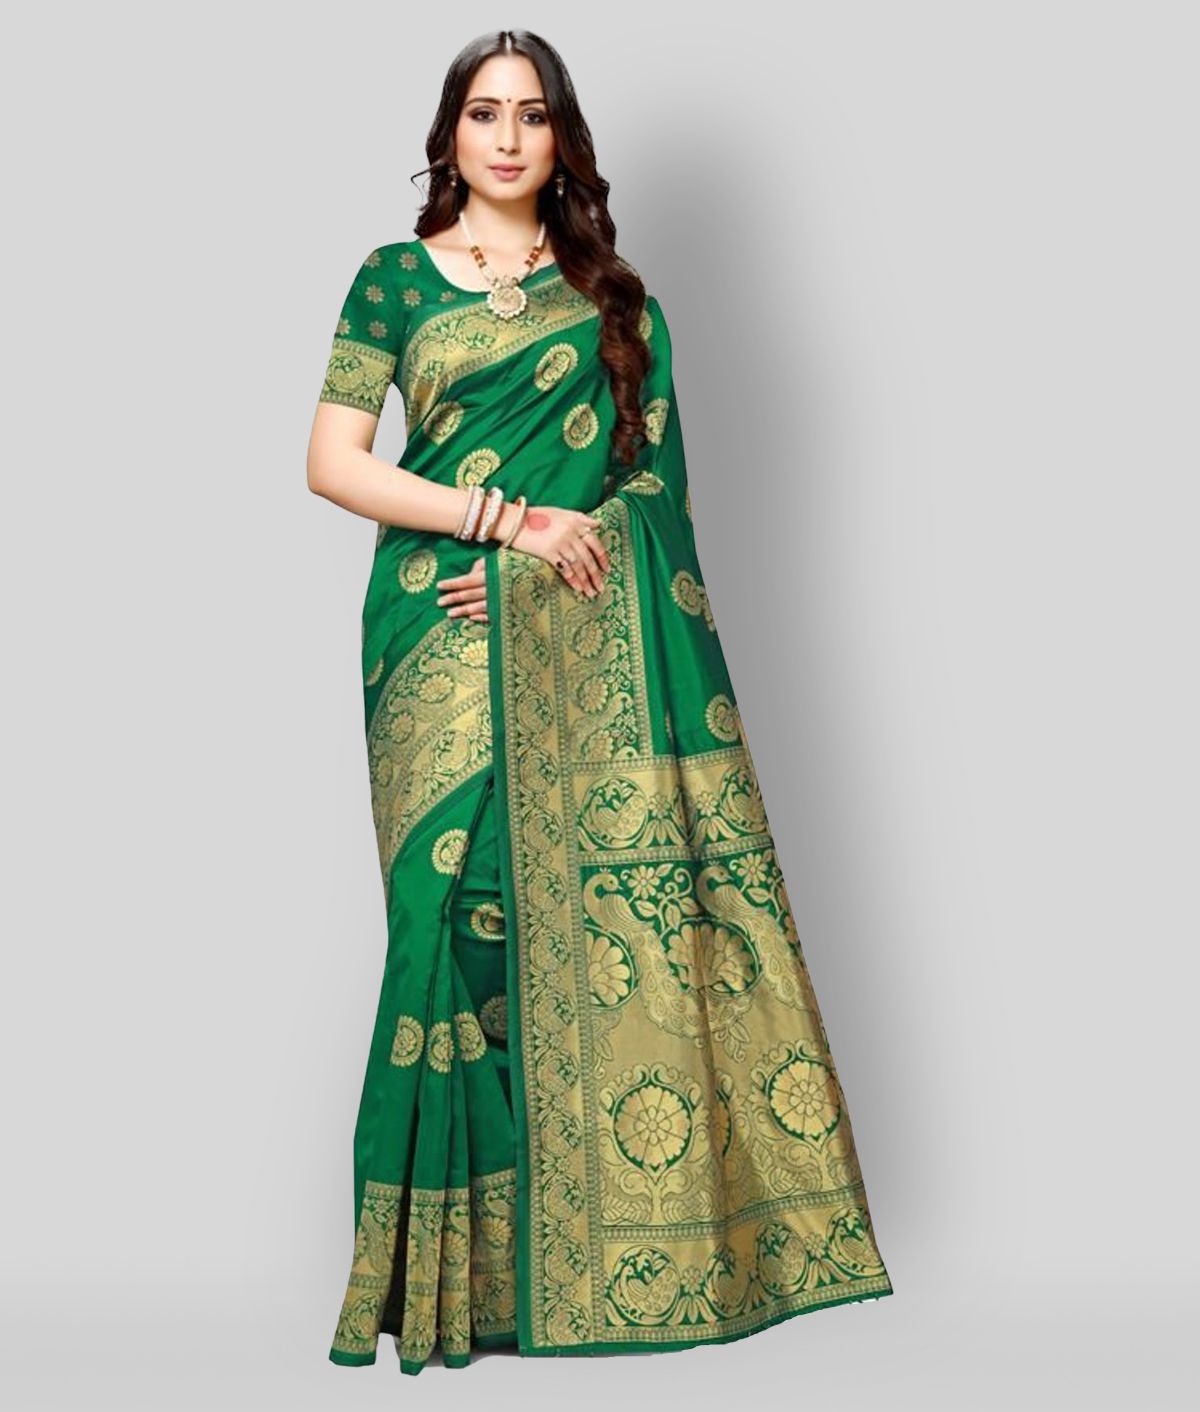     			NENCY FASHION - Green Silk Blend Saree With Blouse Piece (Pack of 1)